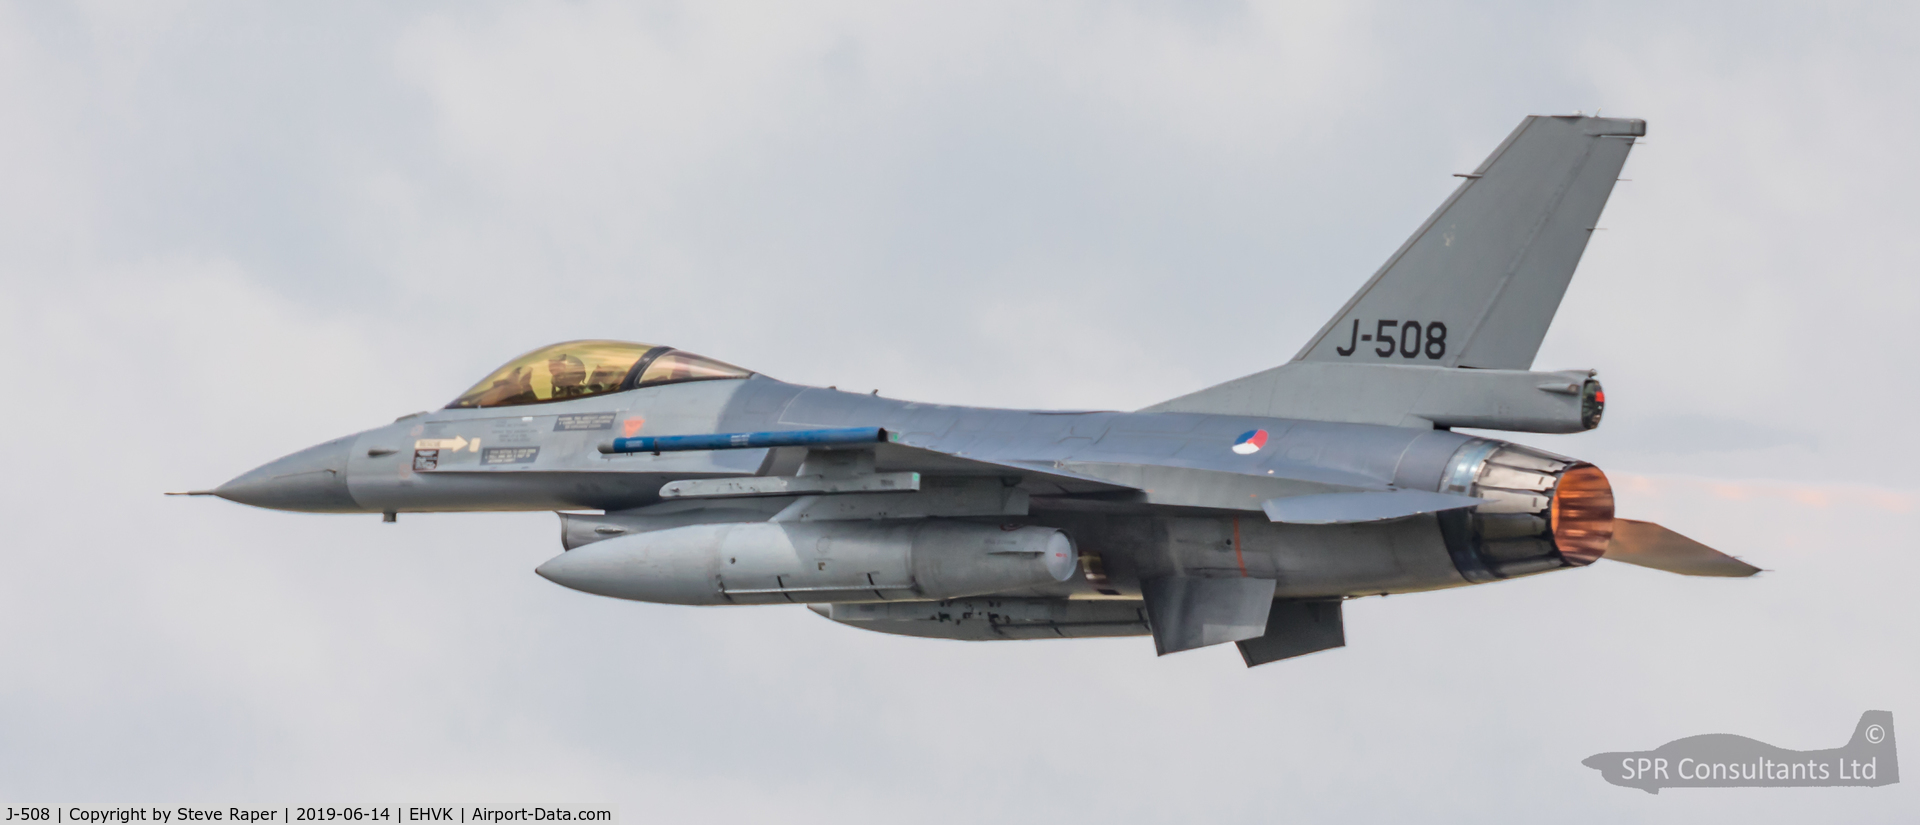 J-508, 1987 Fokker F-16A Fighting Falcon C/N 6D-147, Royal Netherlands Air Force Base Volkel air day 14 June 2019